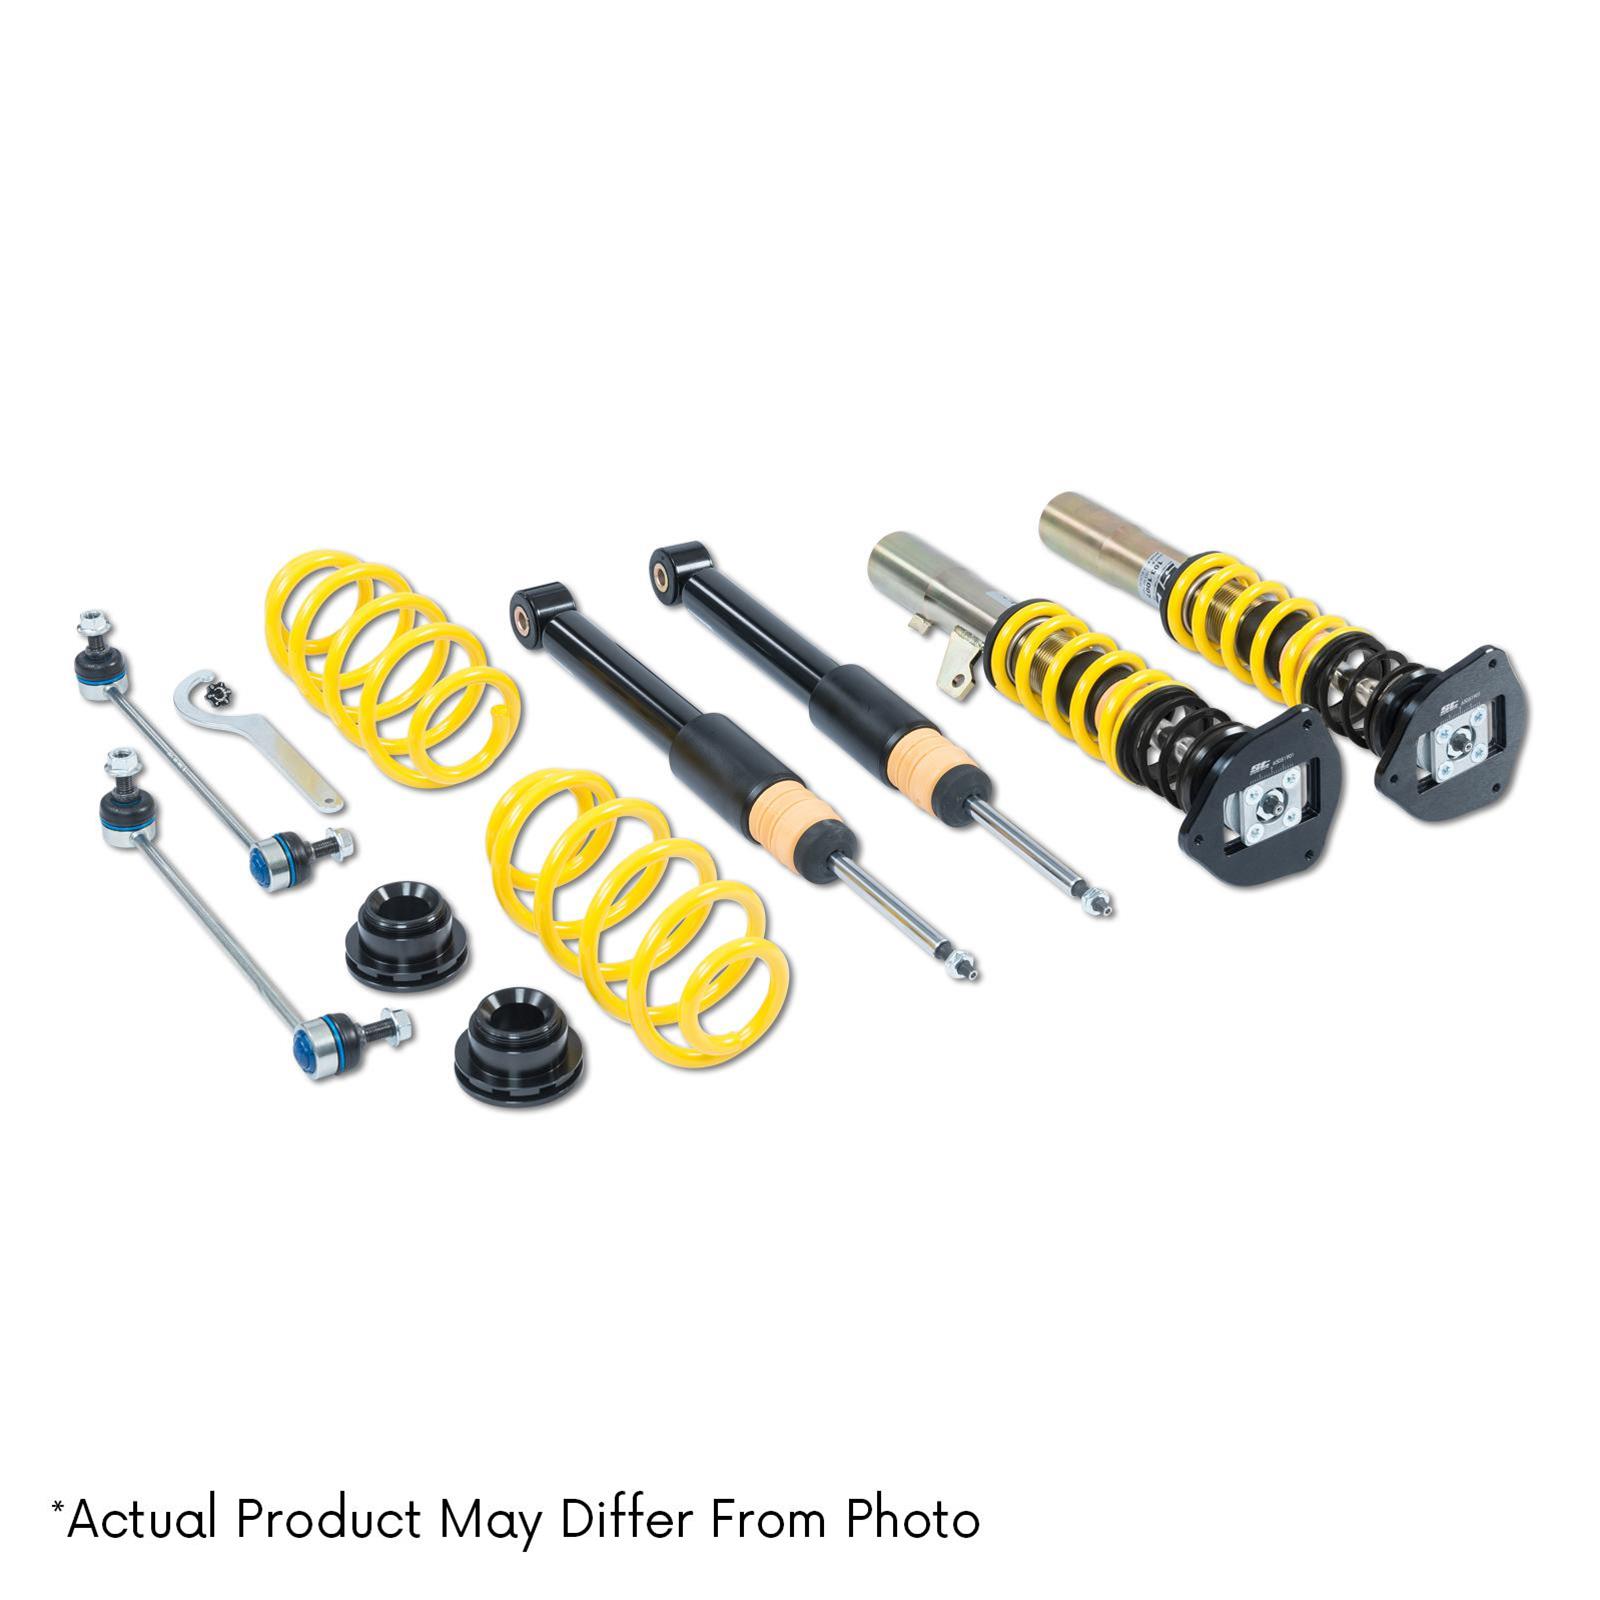 ST Suspensions 18280881 ST Suspensions ST XTA Coilover Kits | Summit Racing